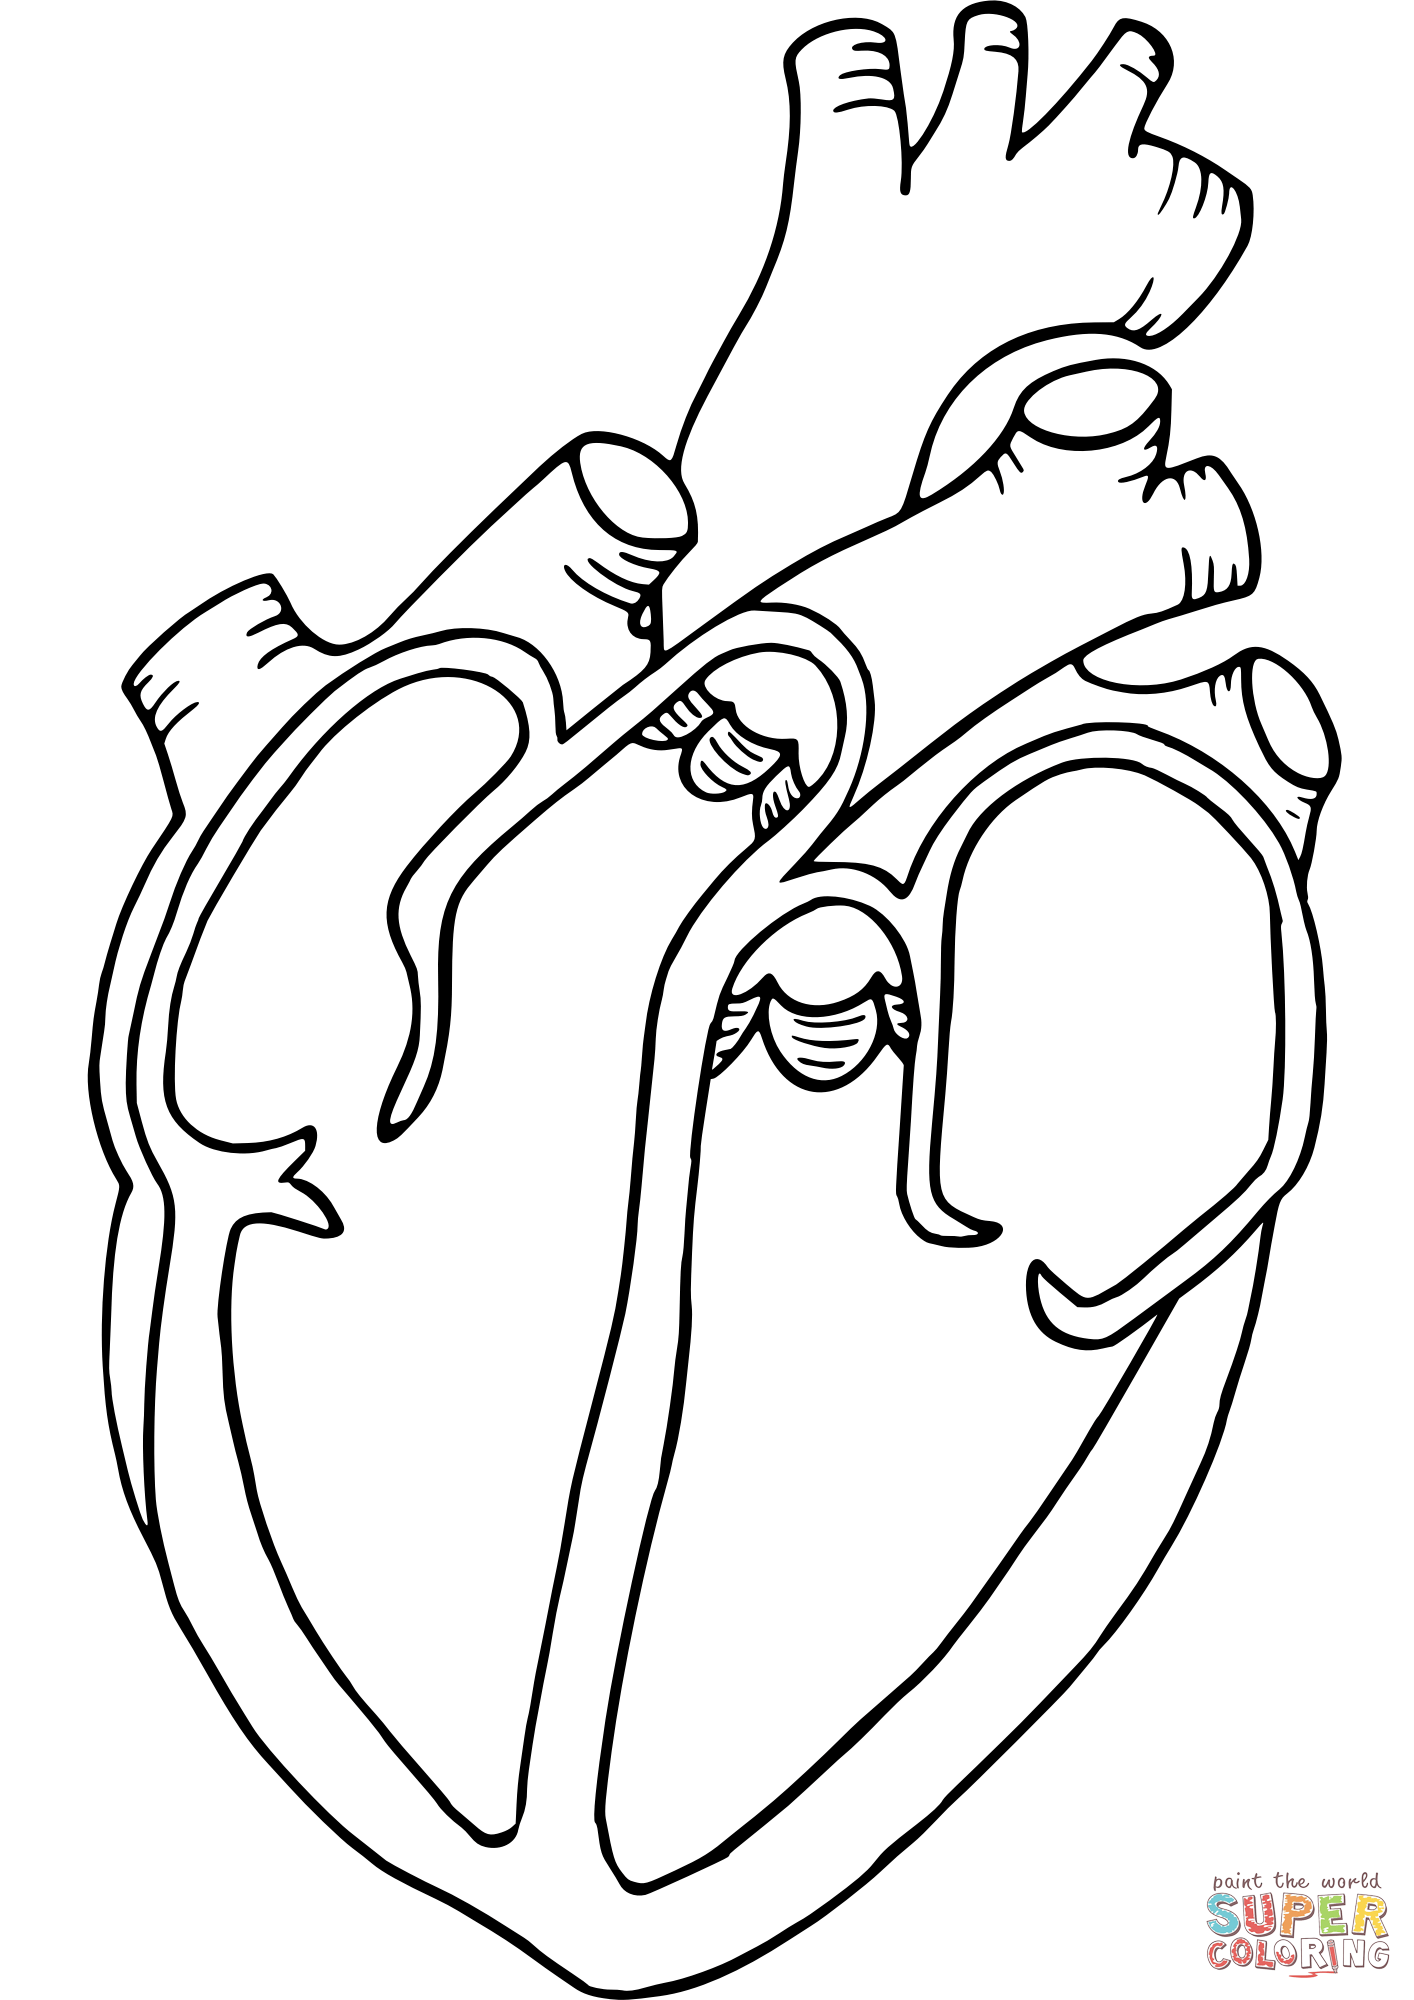 Anatomical Heart coloring page | Free Printable Coloring Pages